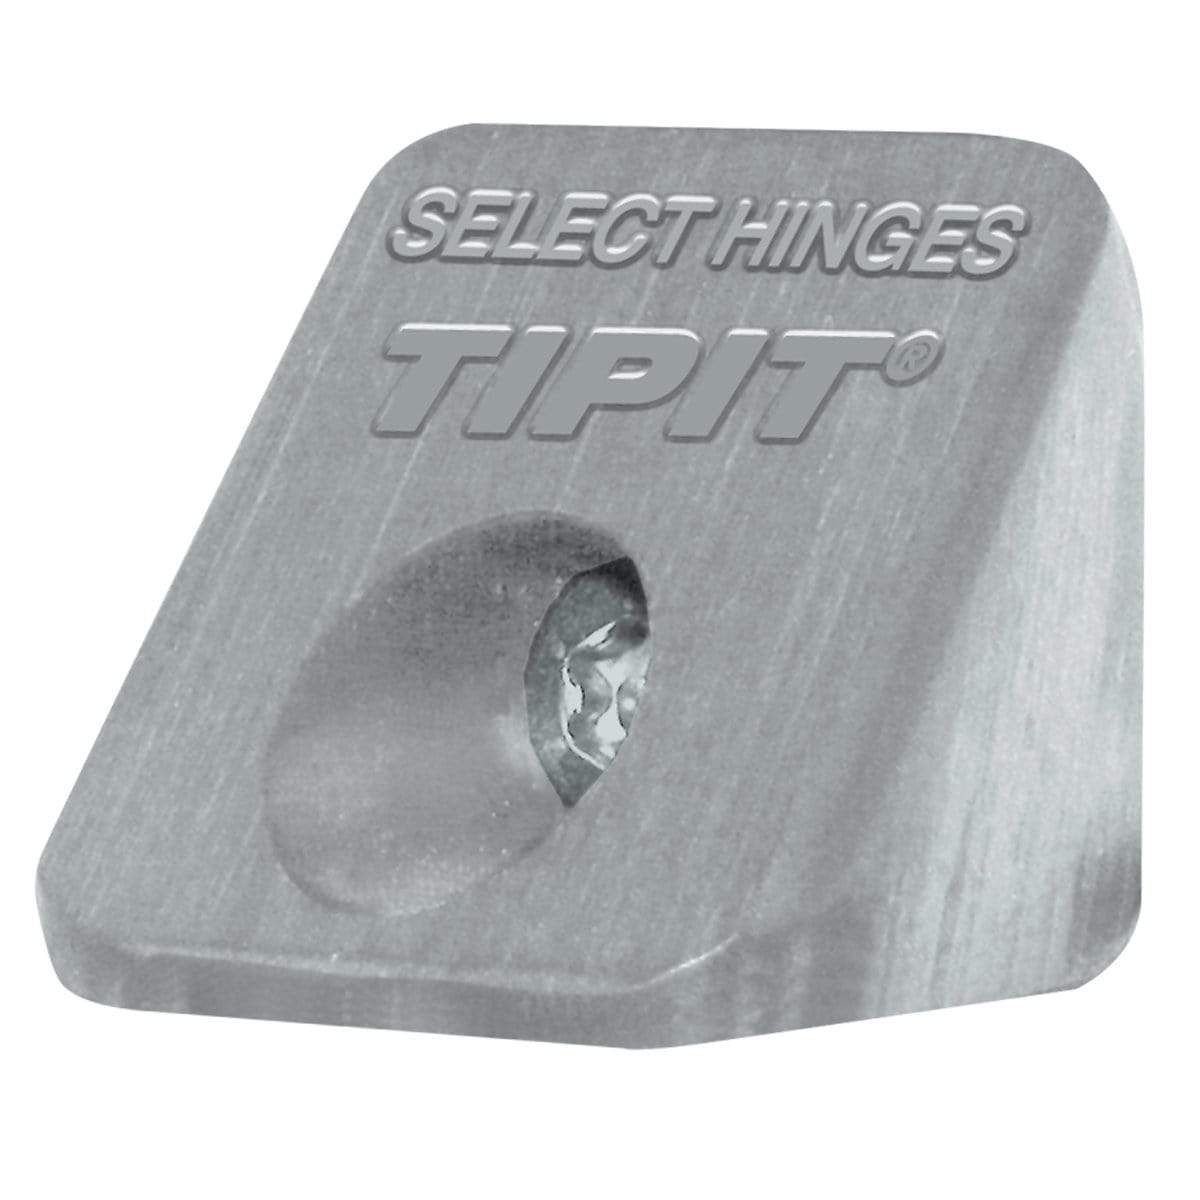 Tipit Continuous Hinge Mounting Tip - Surface Mounted For Concealed Continuous Geared Hinges - Retrofit Or New Construction - Gray Polymer - Sold Individually